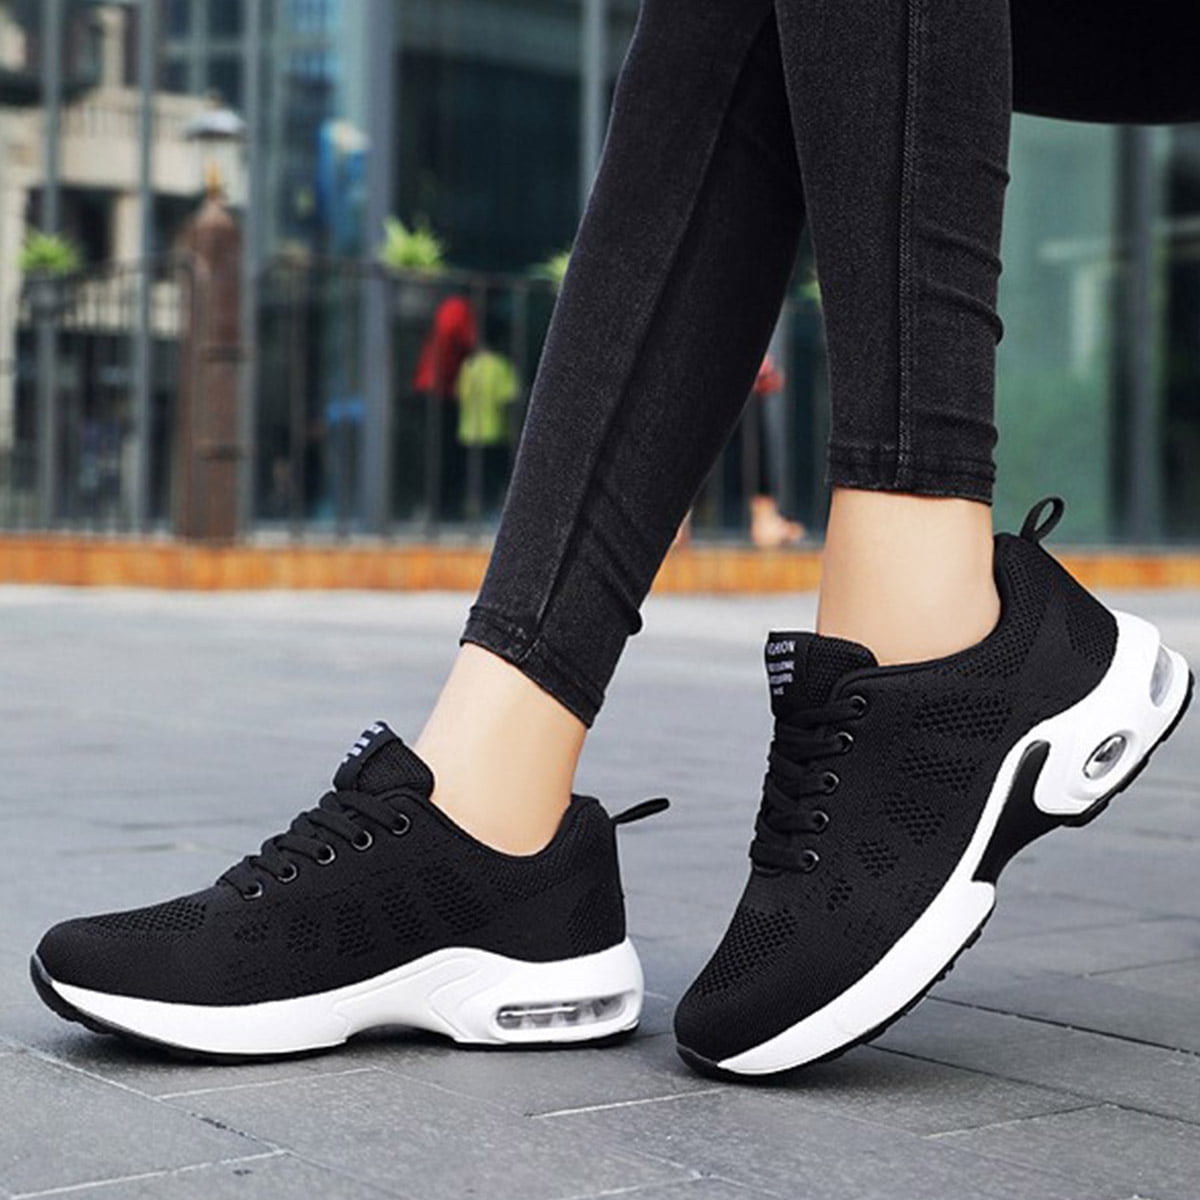 Fashion Womens Sneakers Walking Running Athletic Sports Tennis Casual Shoes Pair 